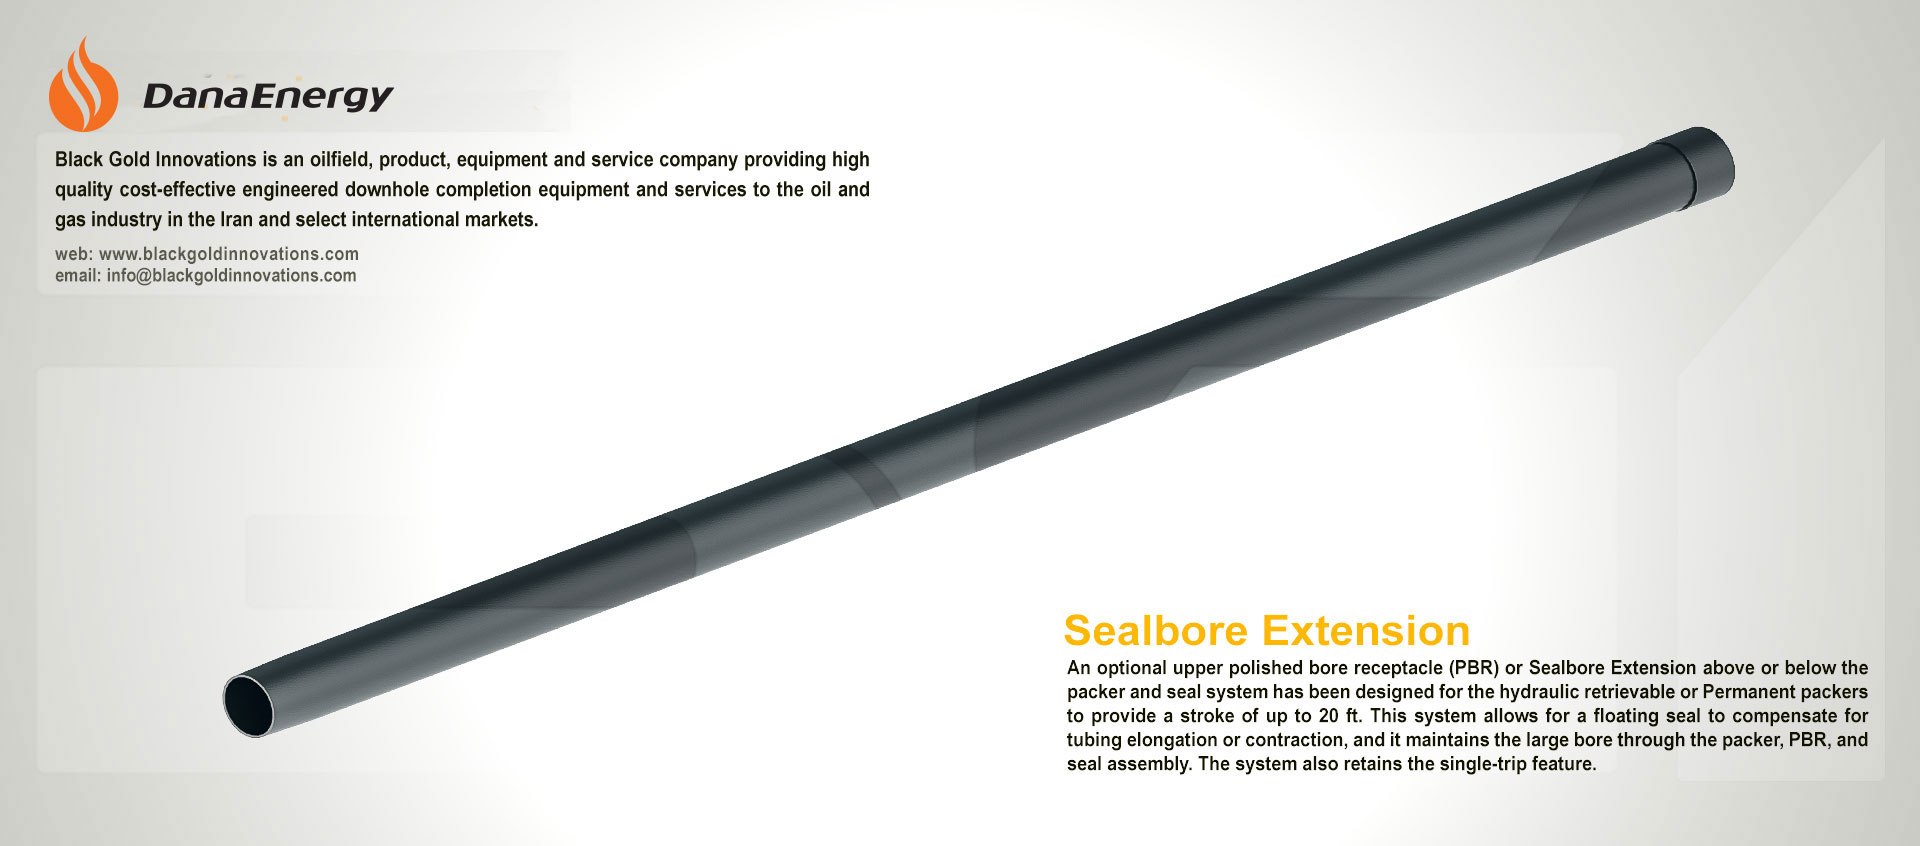 Seal bore Extension